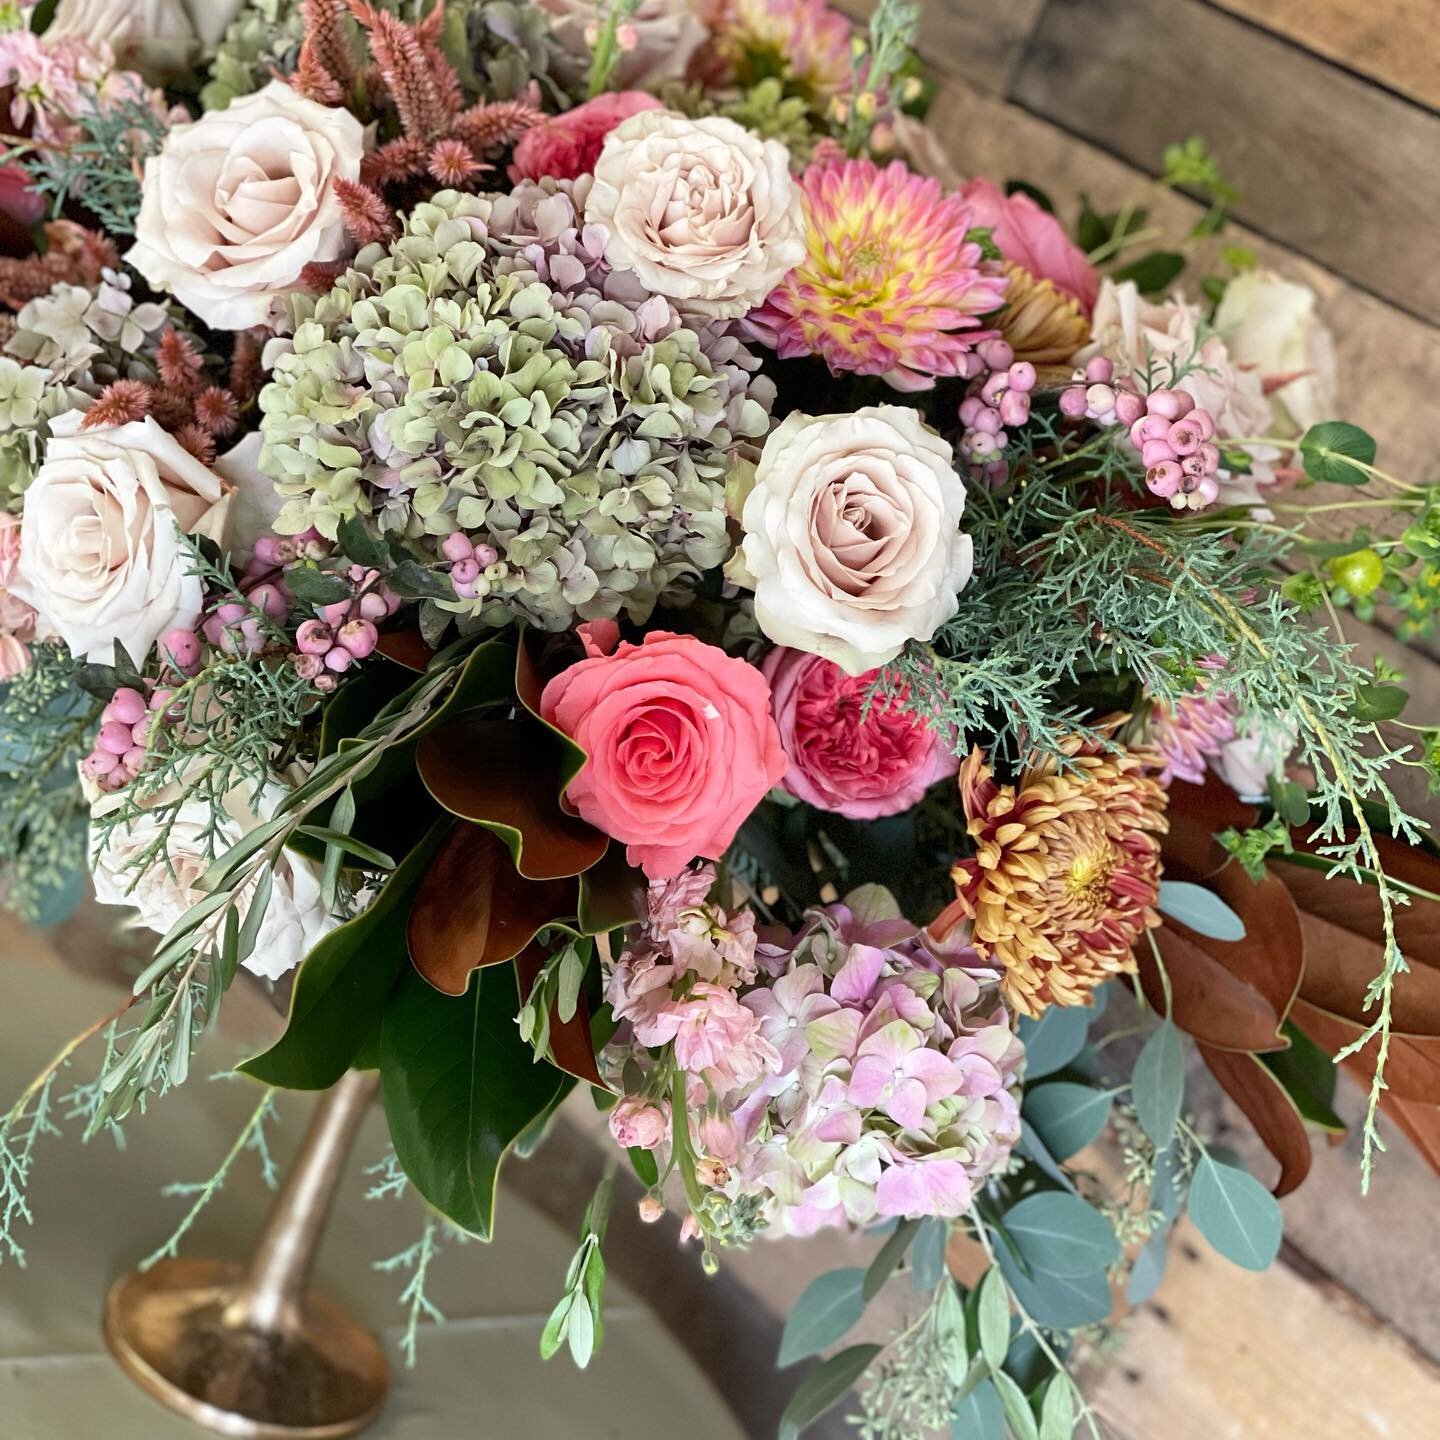 Design inspiration from @andreakgristfloralart at our recent open house at @florasourcekansascity. Pretties include sapphire cedar, magnolia, antique hydrangea, peach stock, lisianthus, pink snowberry, celosia, roses in several shades, dahlias, and o